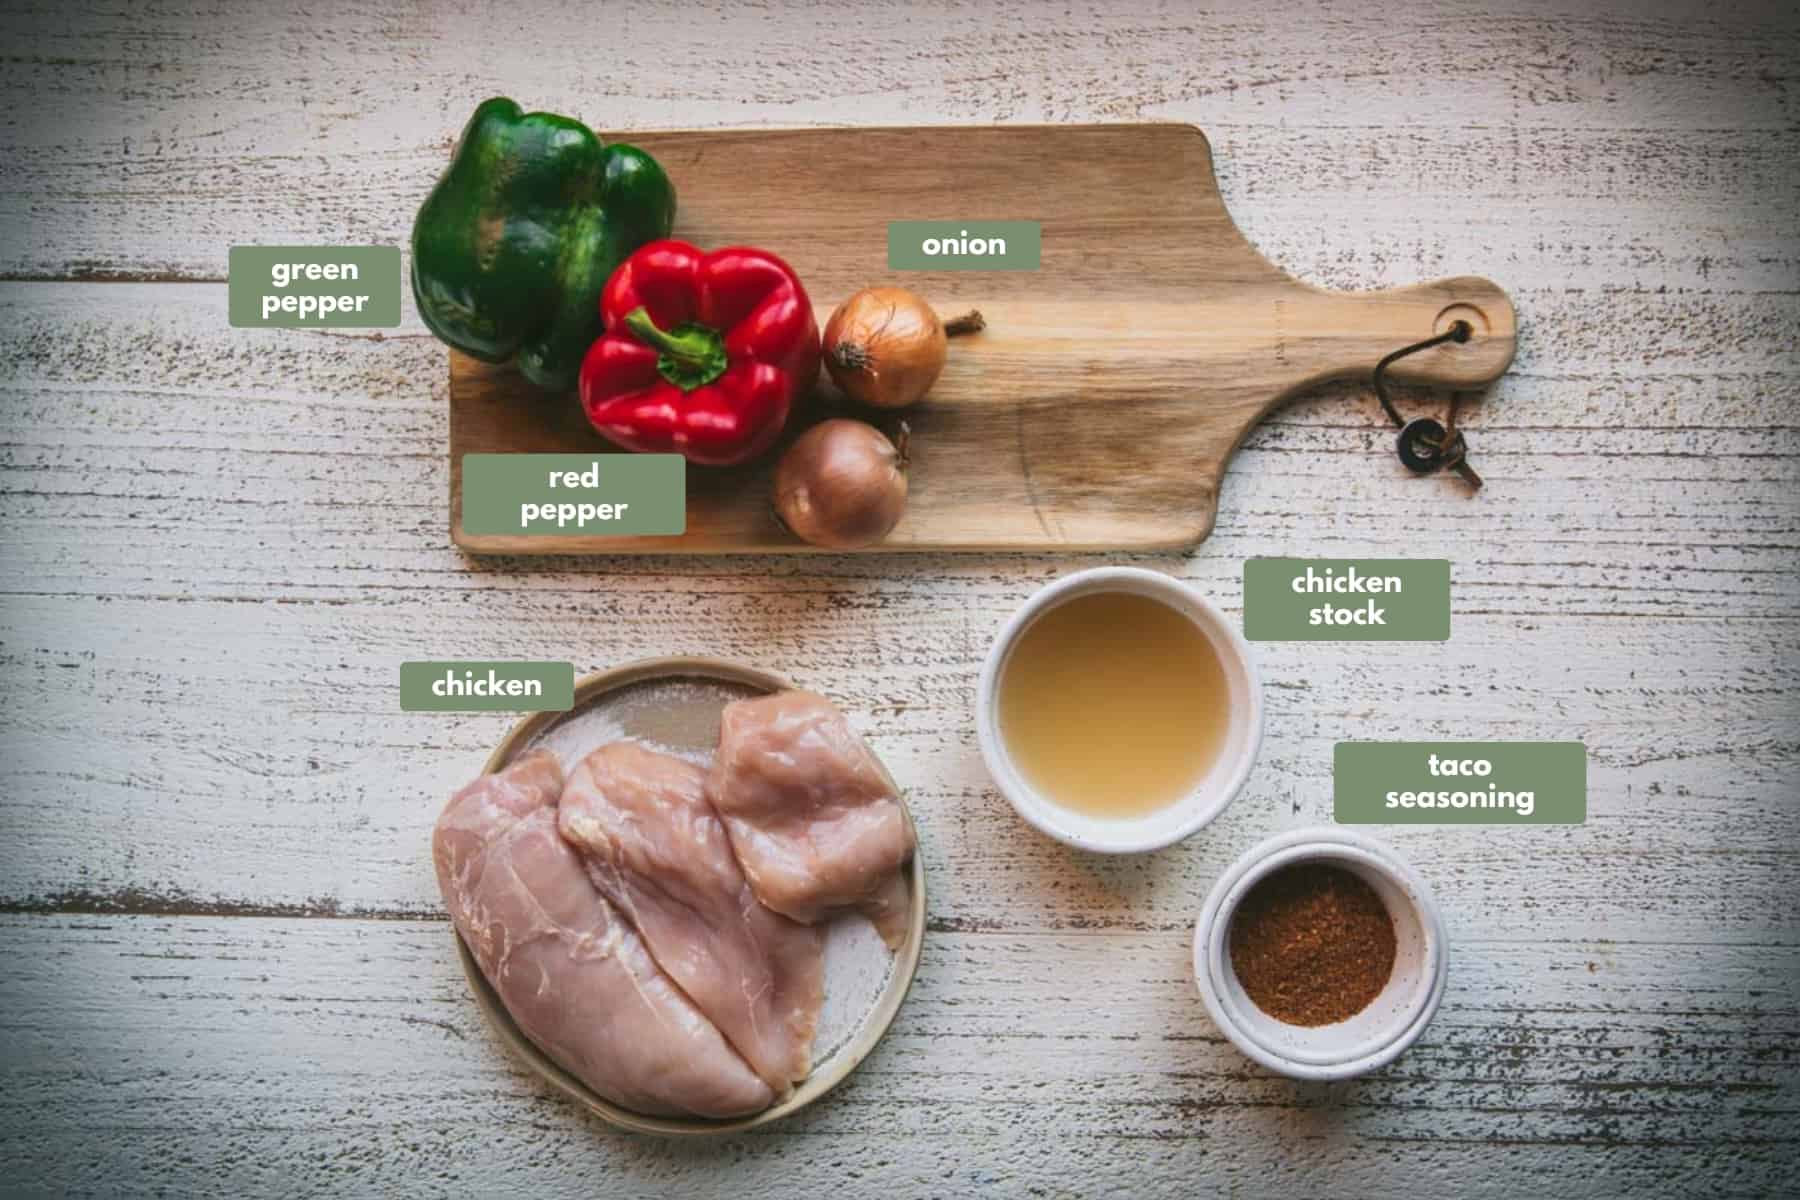 All the ingredients required to make crock pot chicken for inside your tacos. On a white wooden  table is a ceramic plate with raw chicken, a white bowl of chicken stock and a small white bowl with taco seasoning. There is a small wooden chopping board with a red and green pepper and 2 brown onions sitting on the edge of the board.